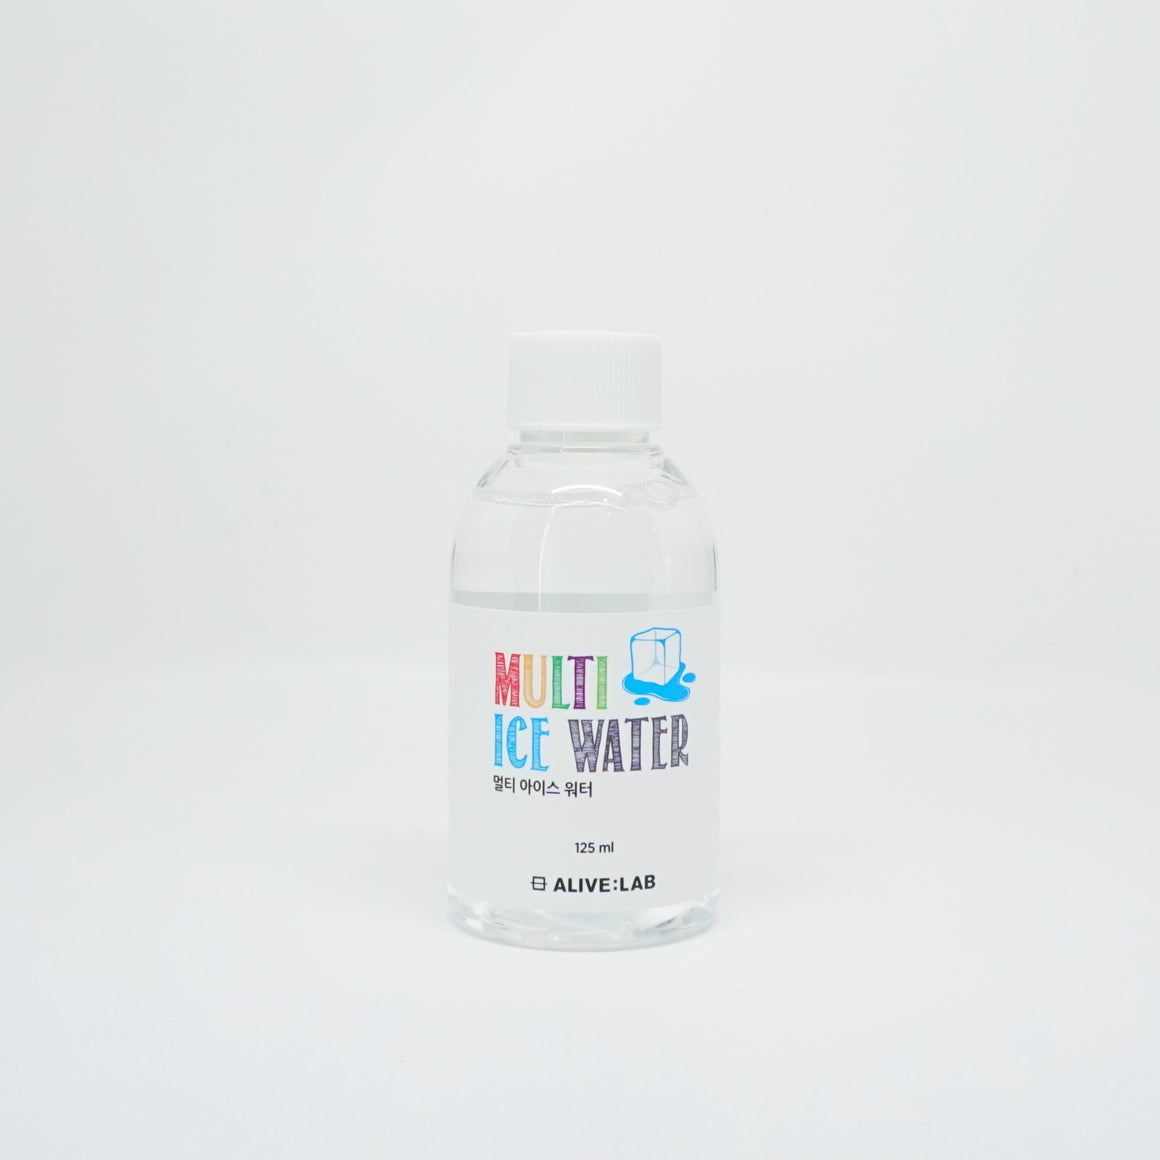 ALIVE:LAB Multi Ice Water